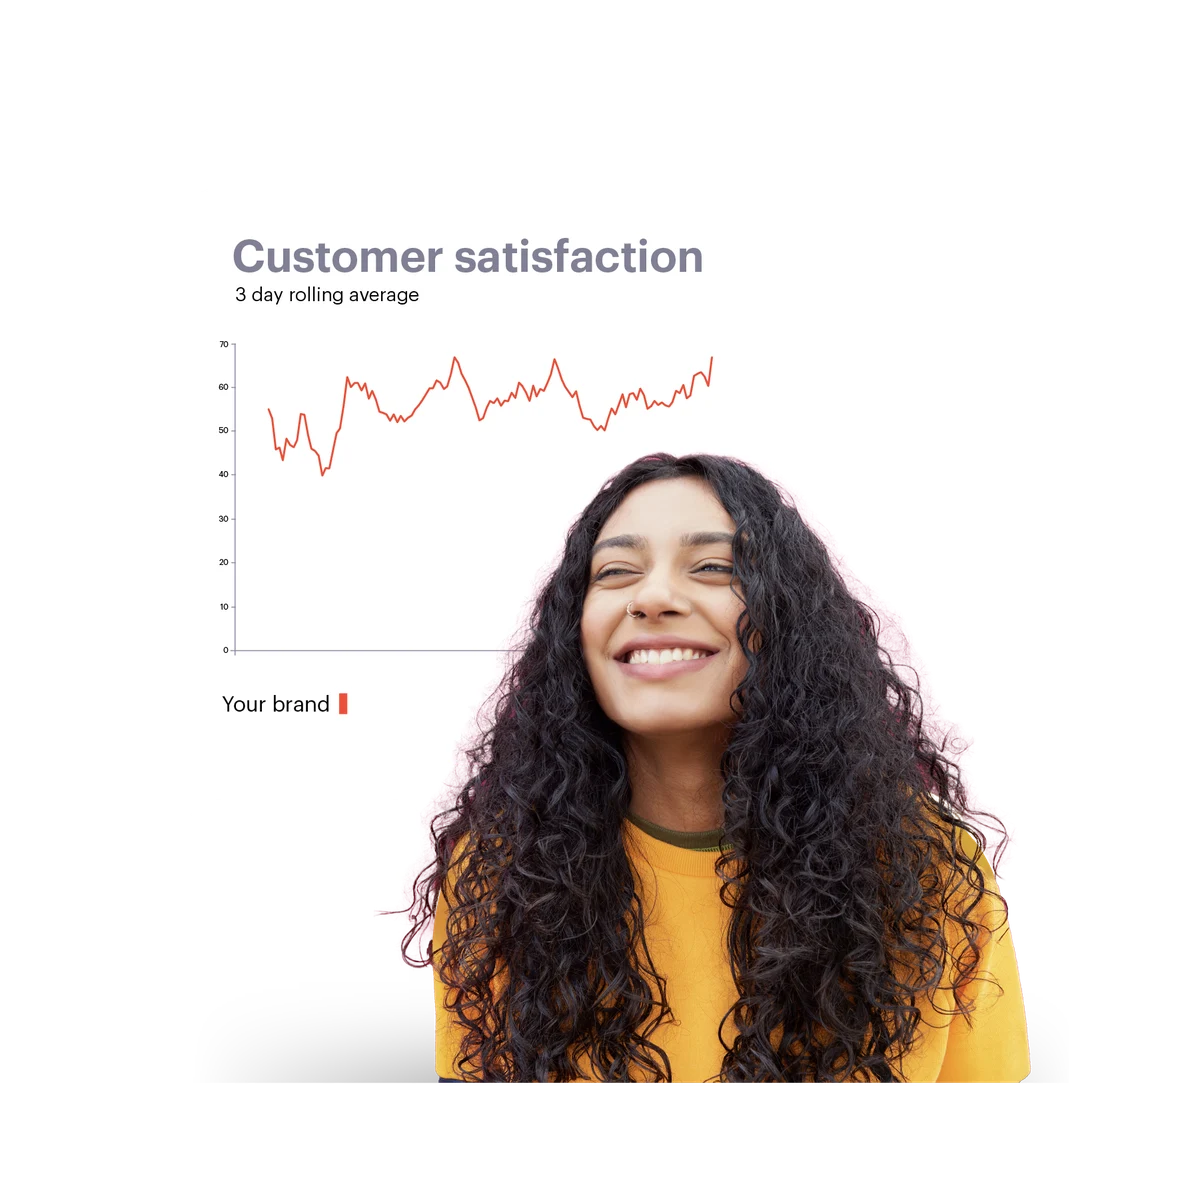 woman with long curly hair and customer satisfaction data behind her